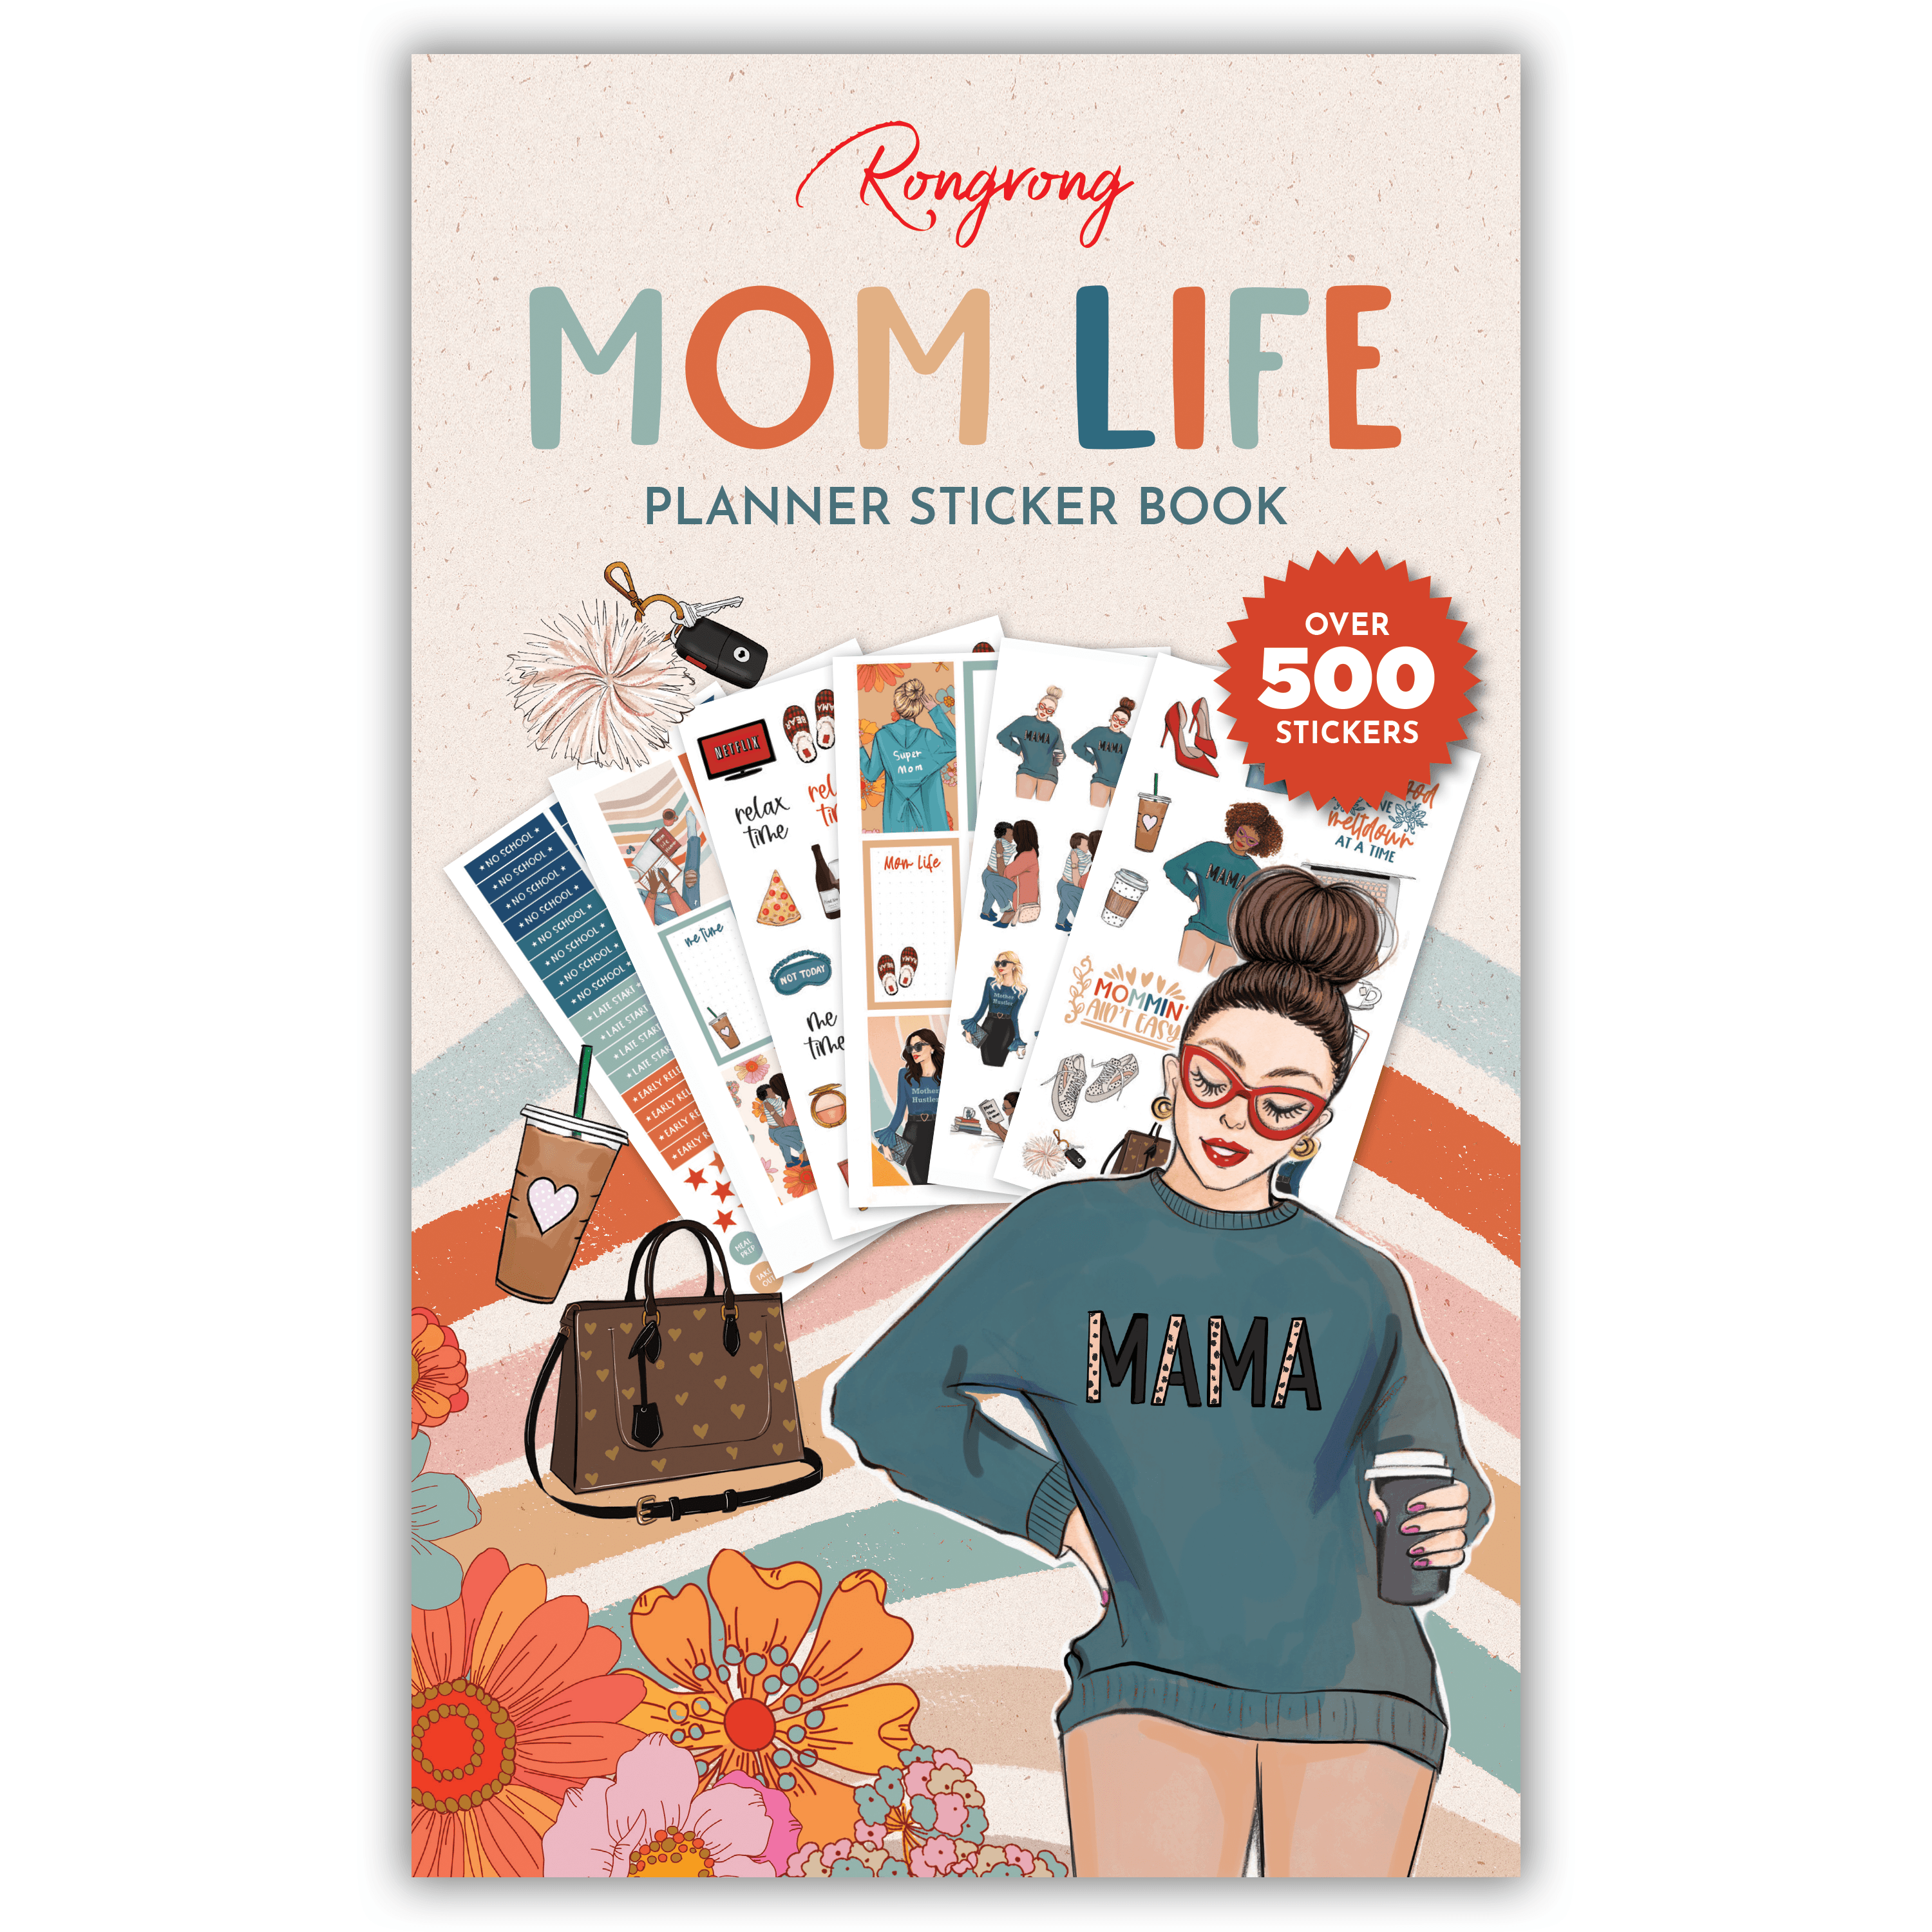 Rongrong DeVoe, Stickers, Planners, Washi Tape & More